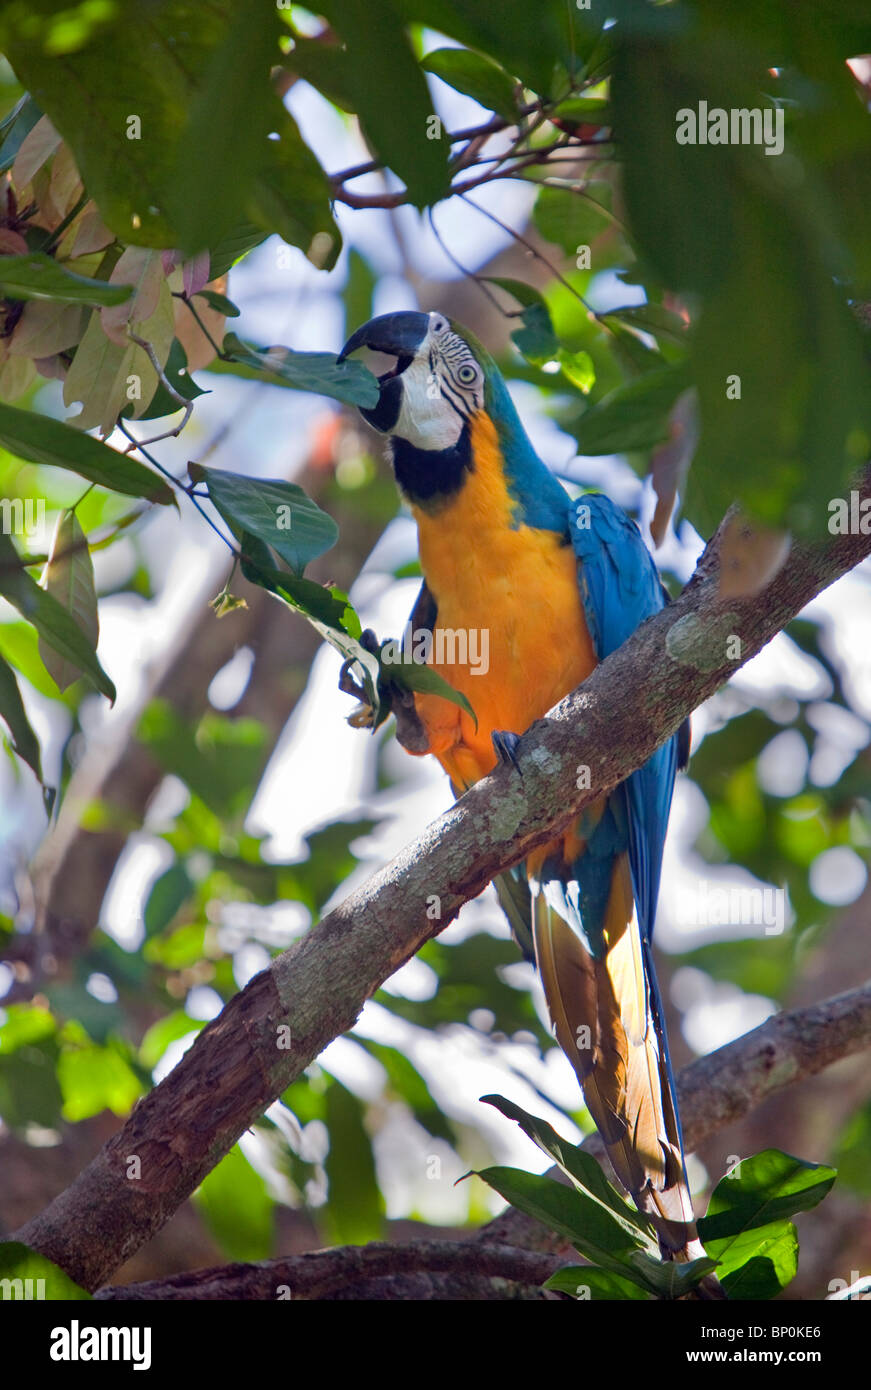 Peru. A Colourful blue-and-yellow macaw in the tropical forest of the Amazon Basin. Stock Photo